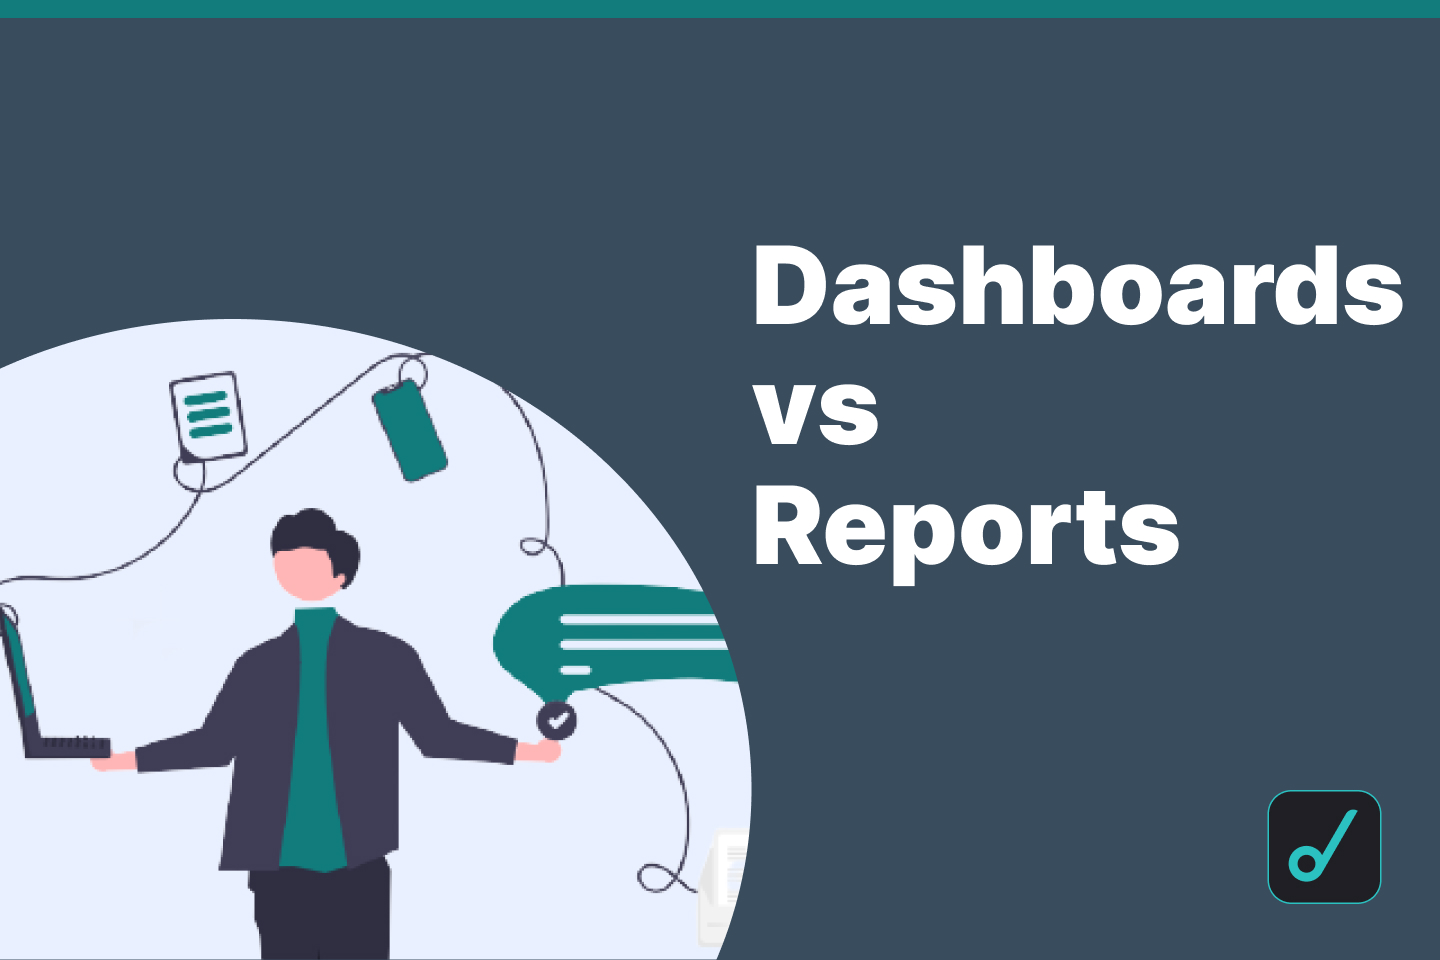 Dashboards vs. Reports: What Should You Use and Why?